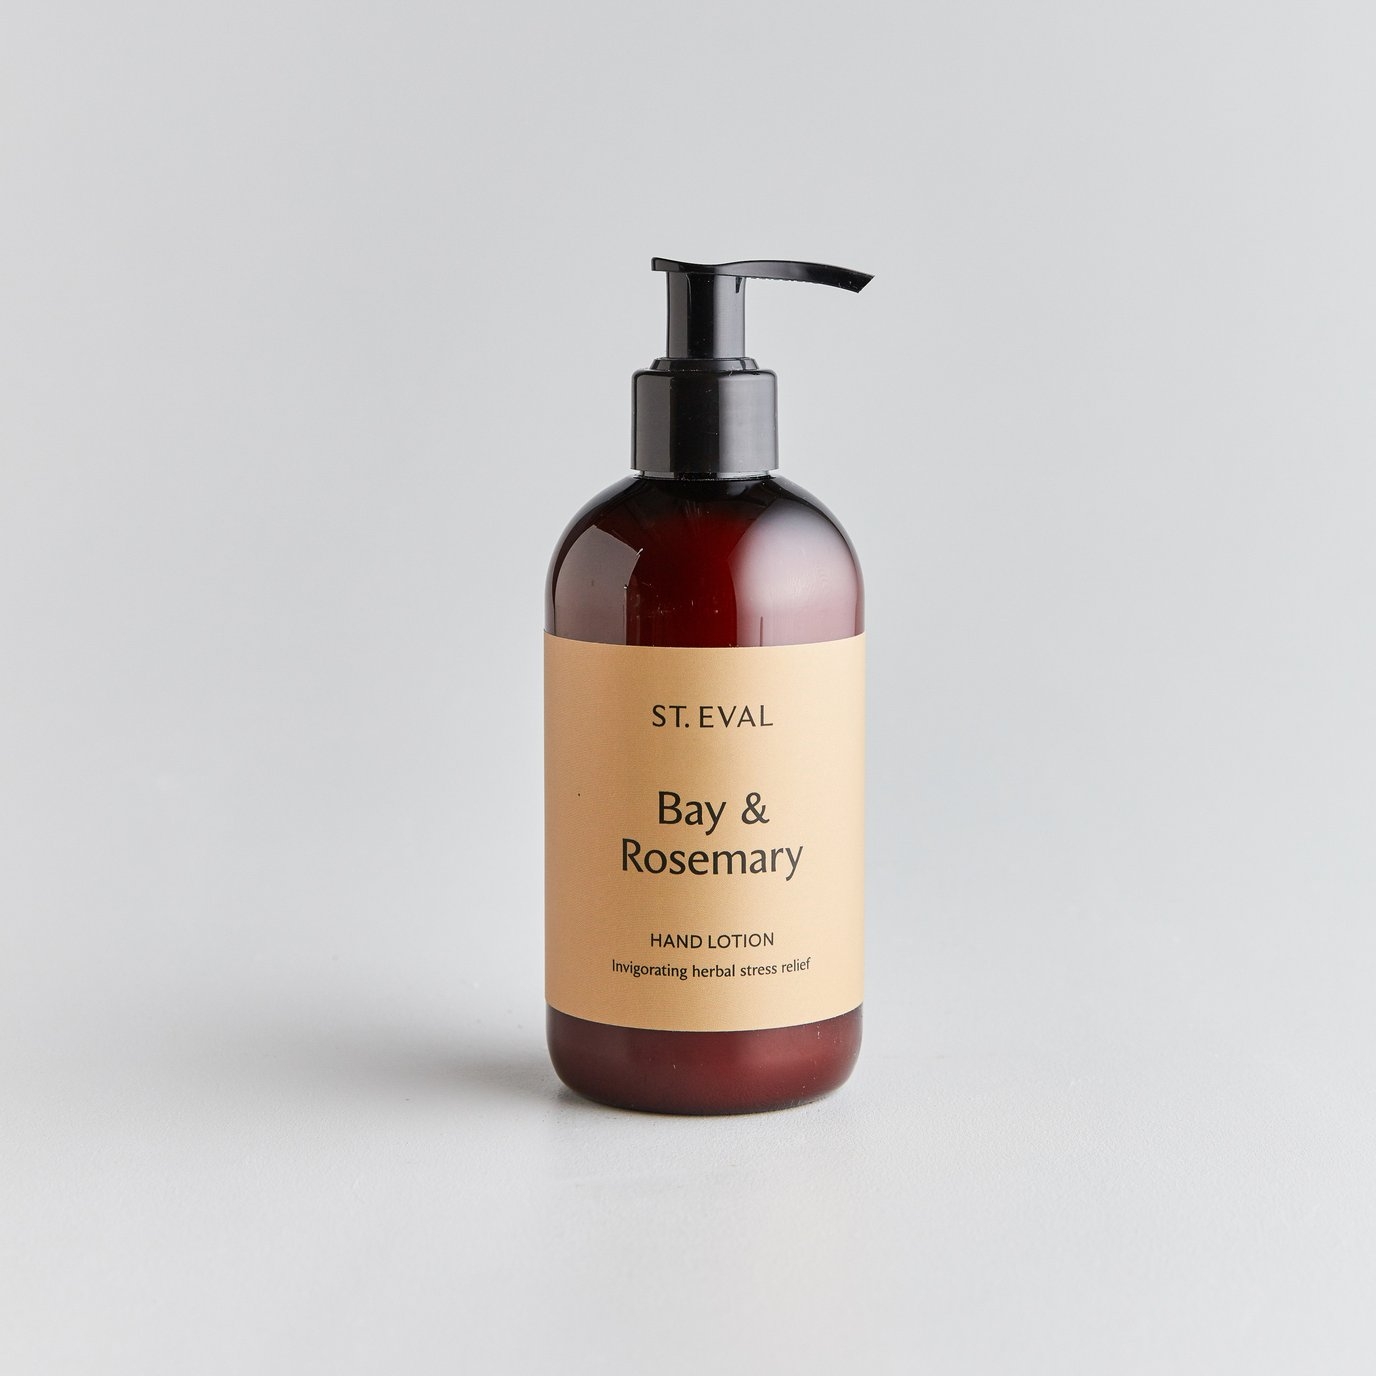 Bay & Rosemary Scented Hand Lotion | St. Eval – St. Eval Candle Company